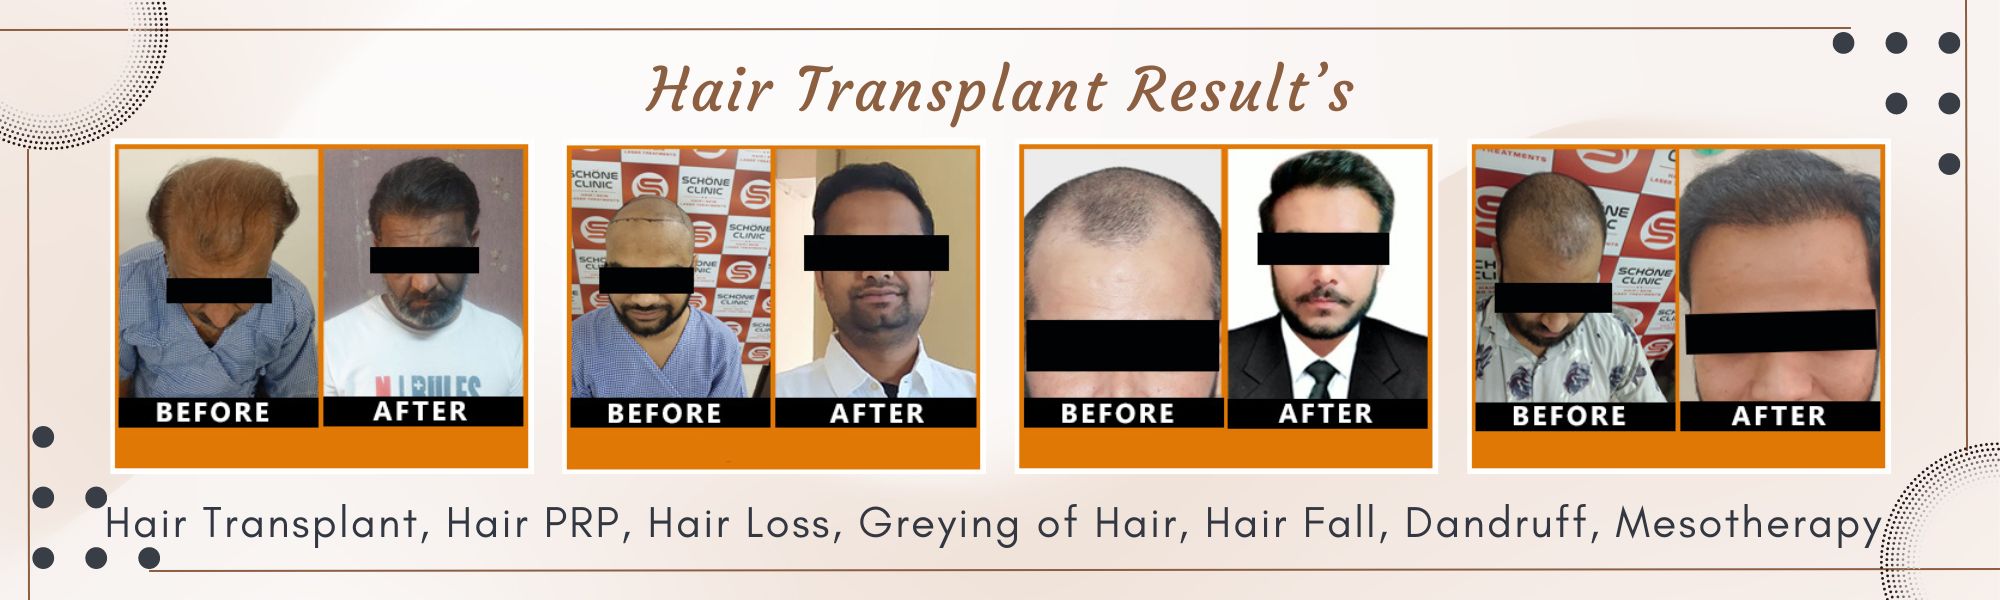 Hair Transplant Result in Six Months